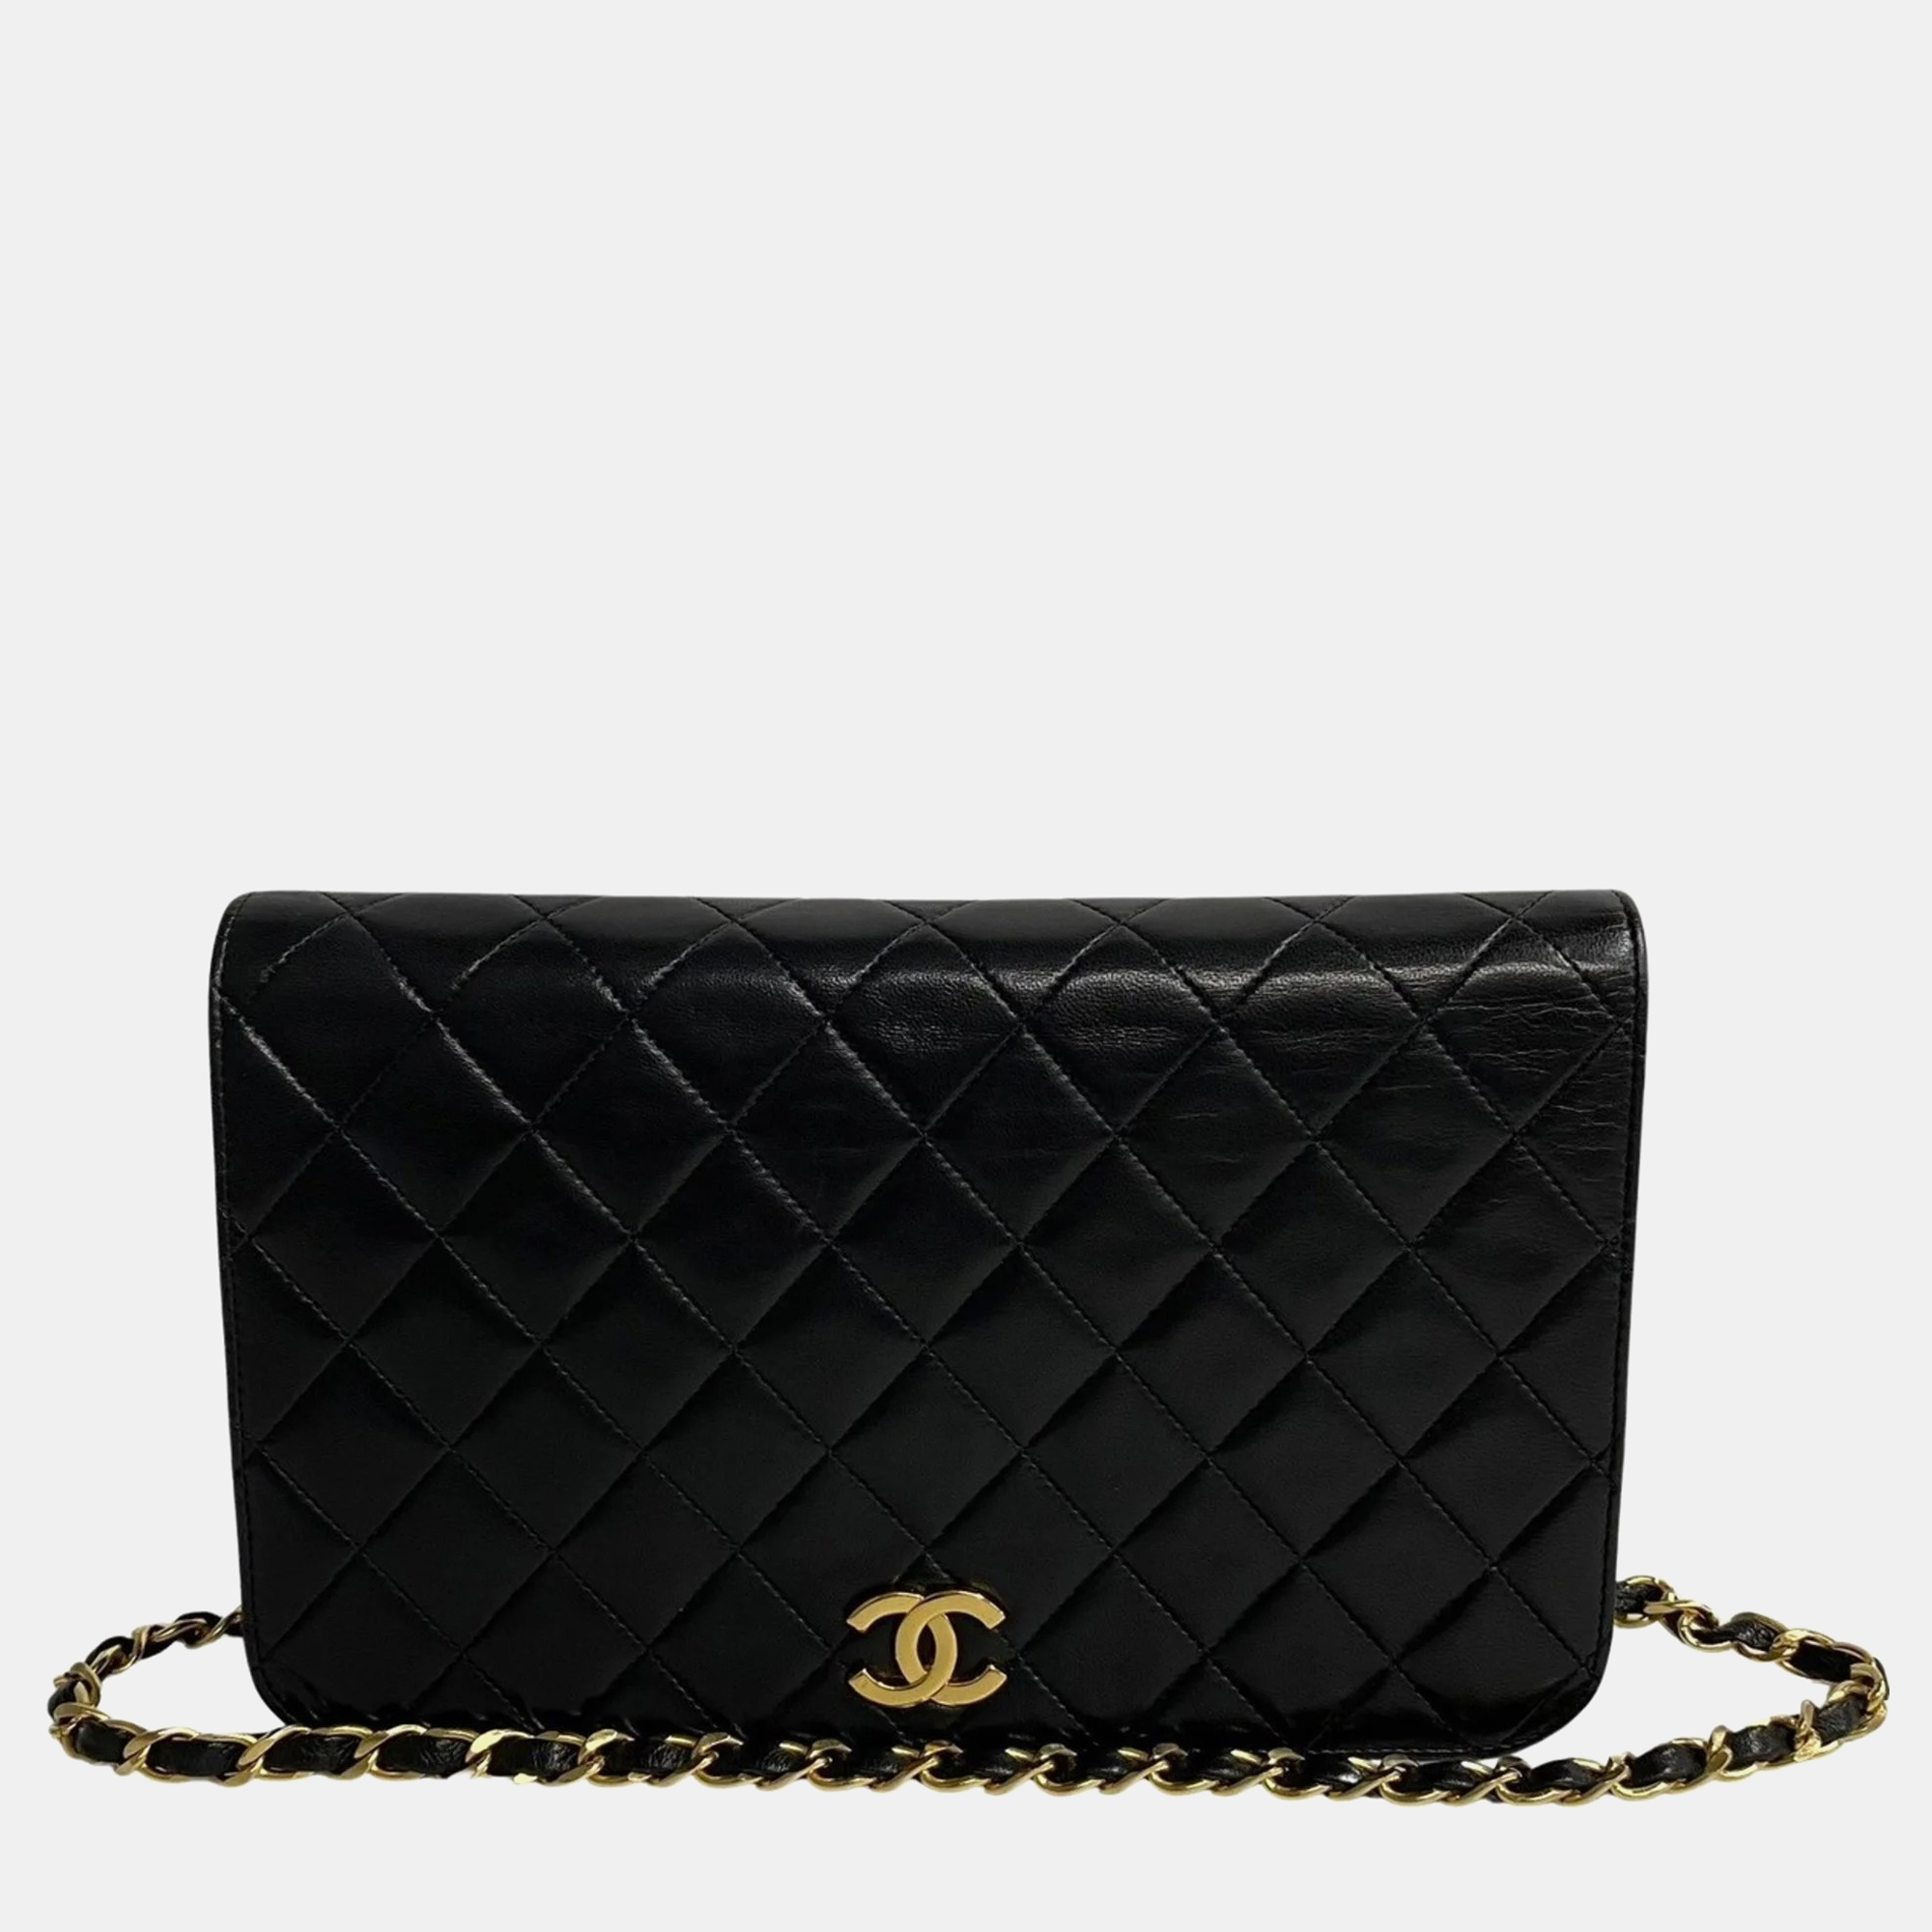 Chanel black quilted lambskin leather flap chain shoulder bag